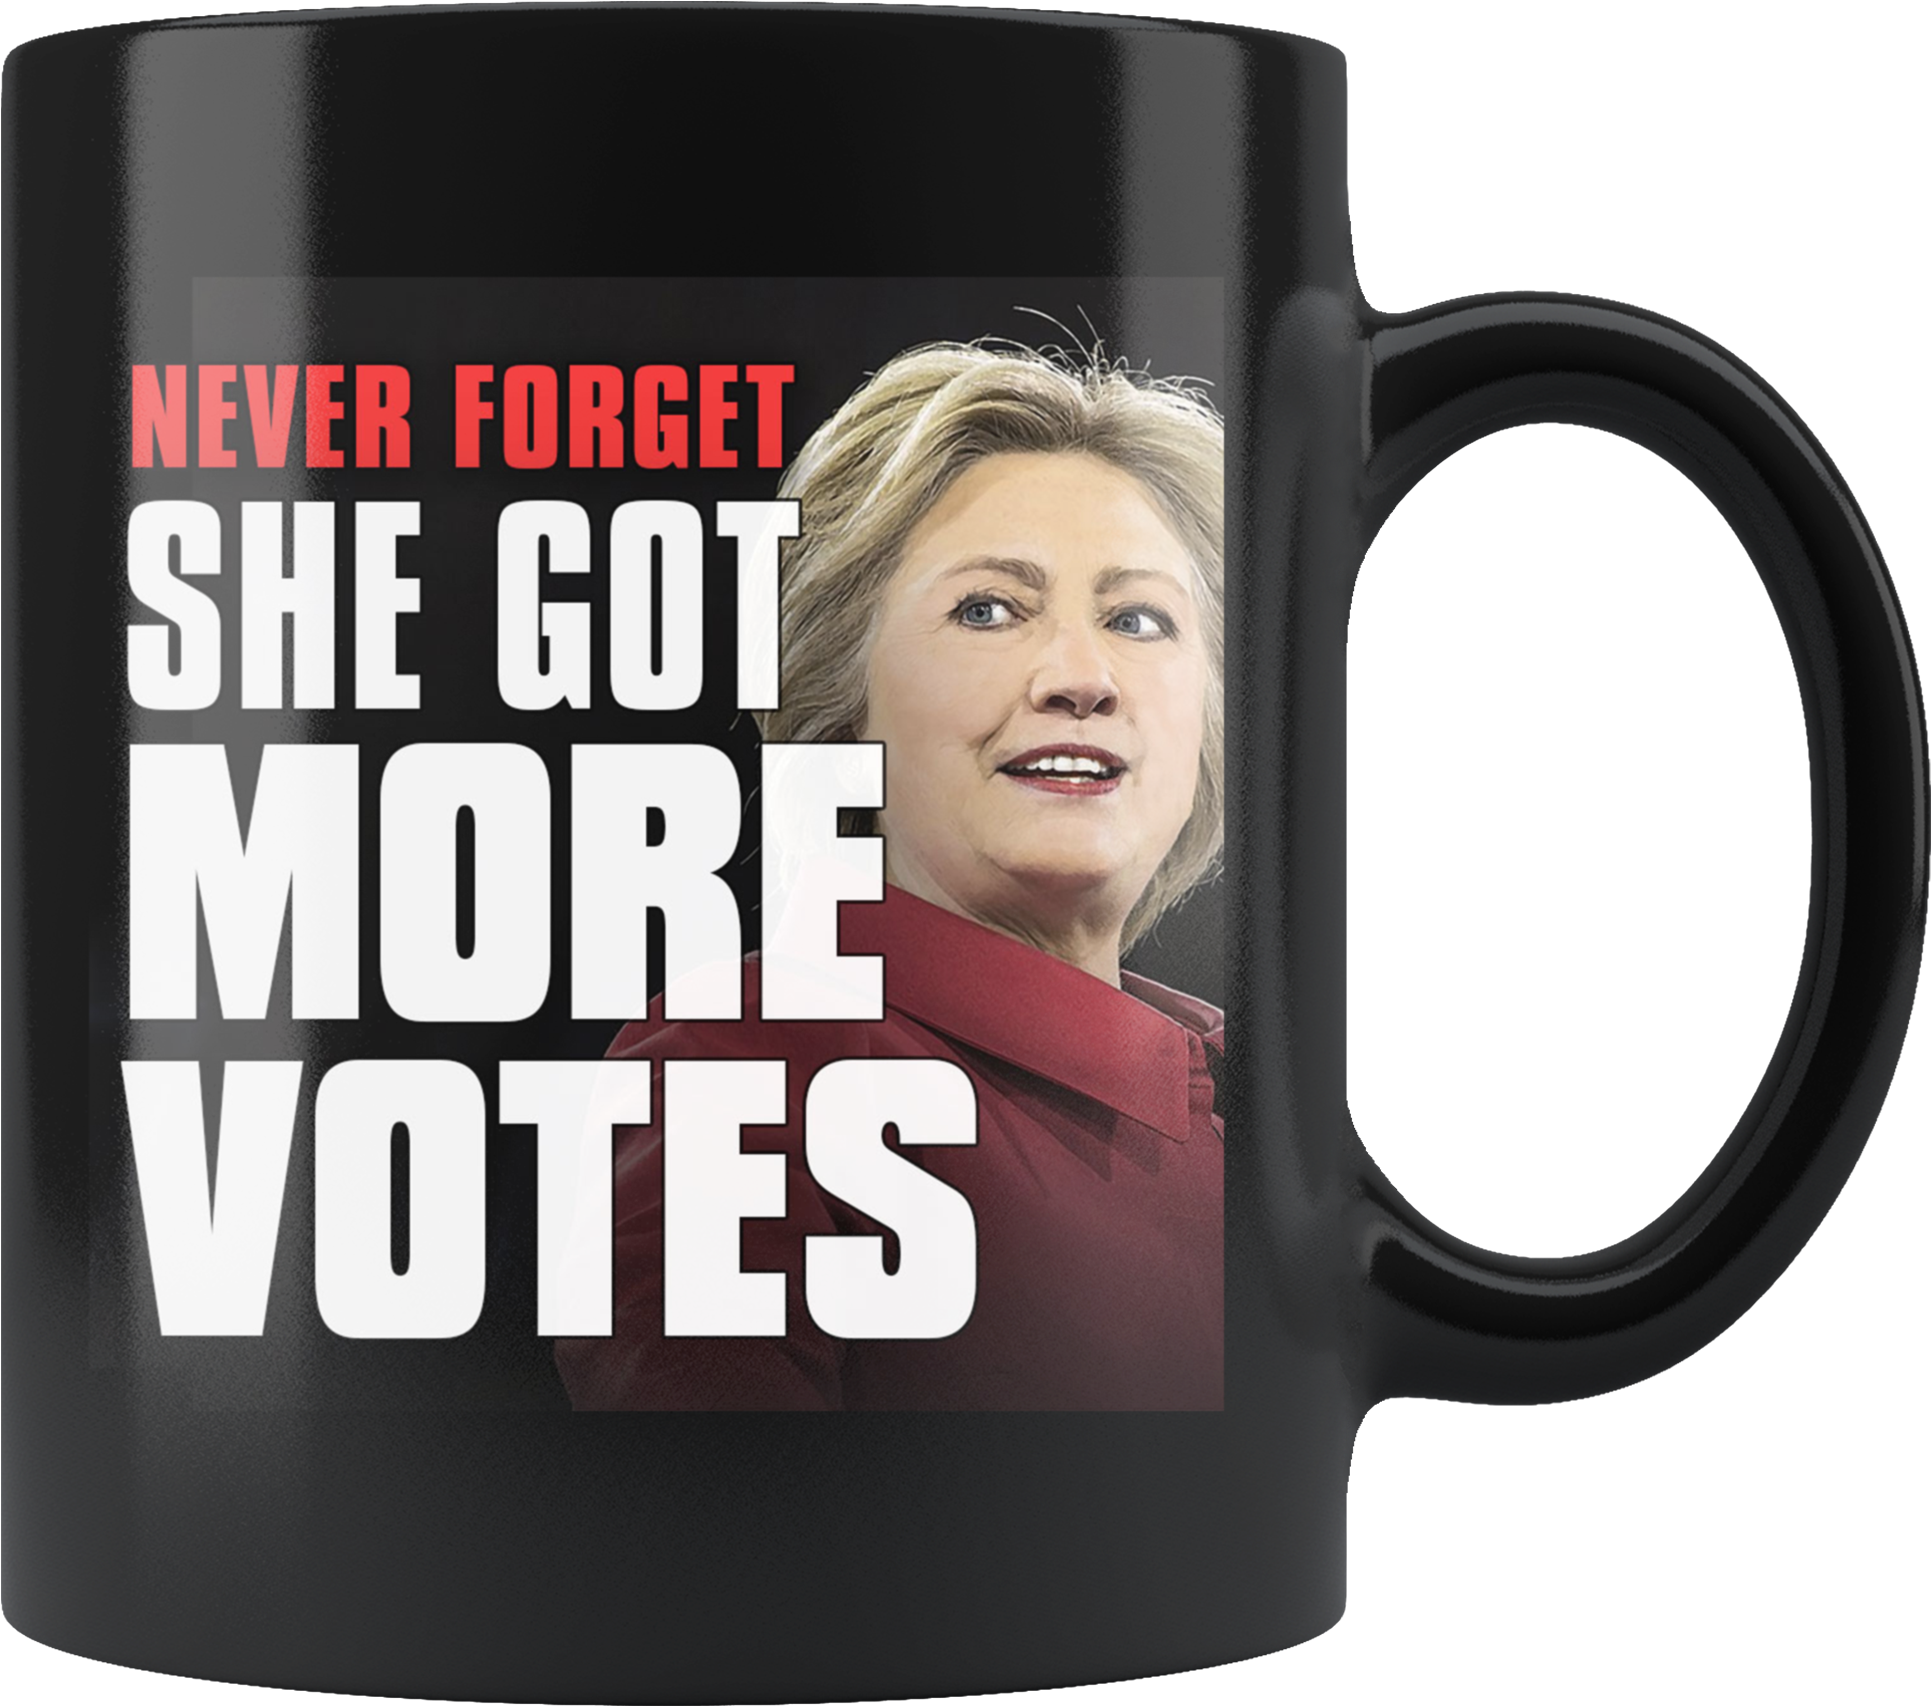 A Black Mug With A Picture Of A Woman